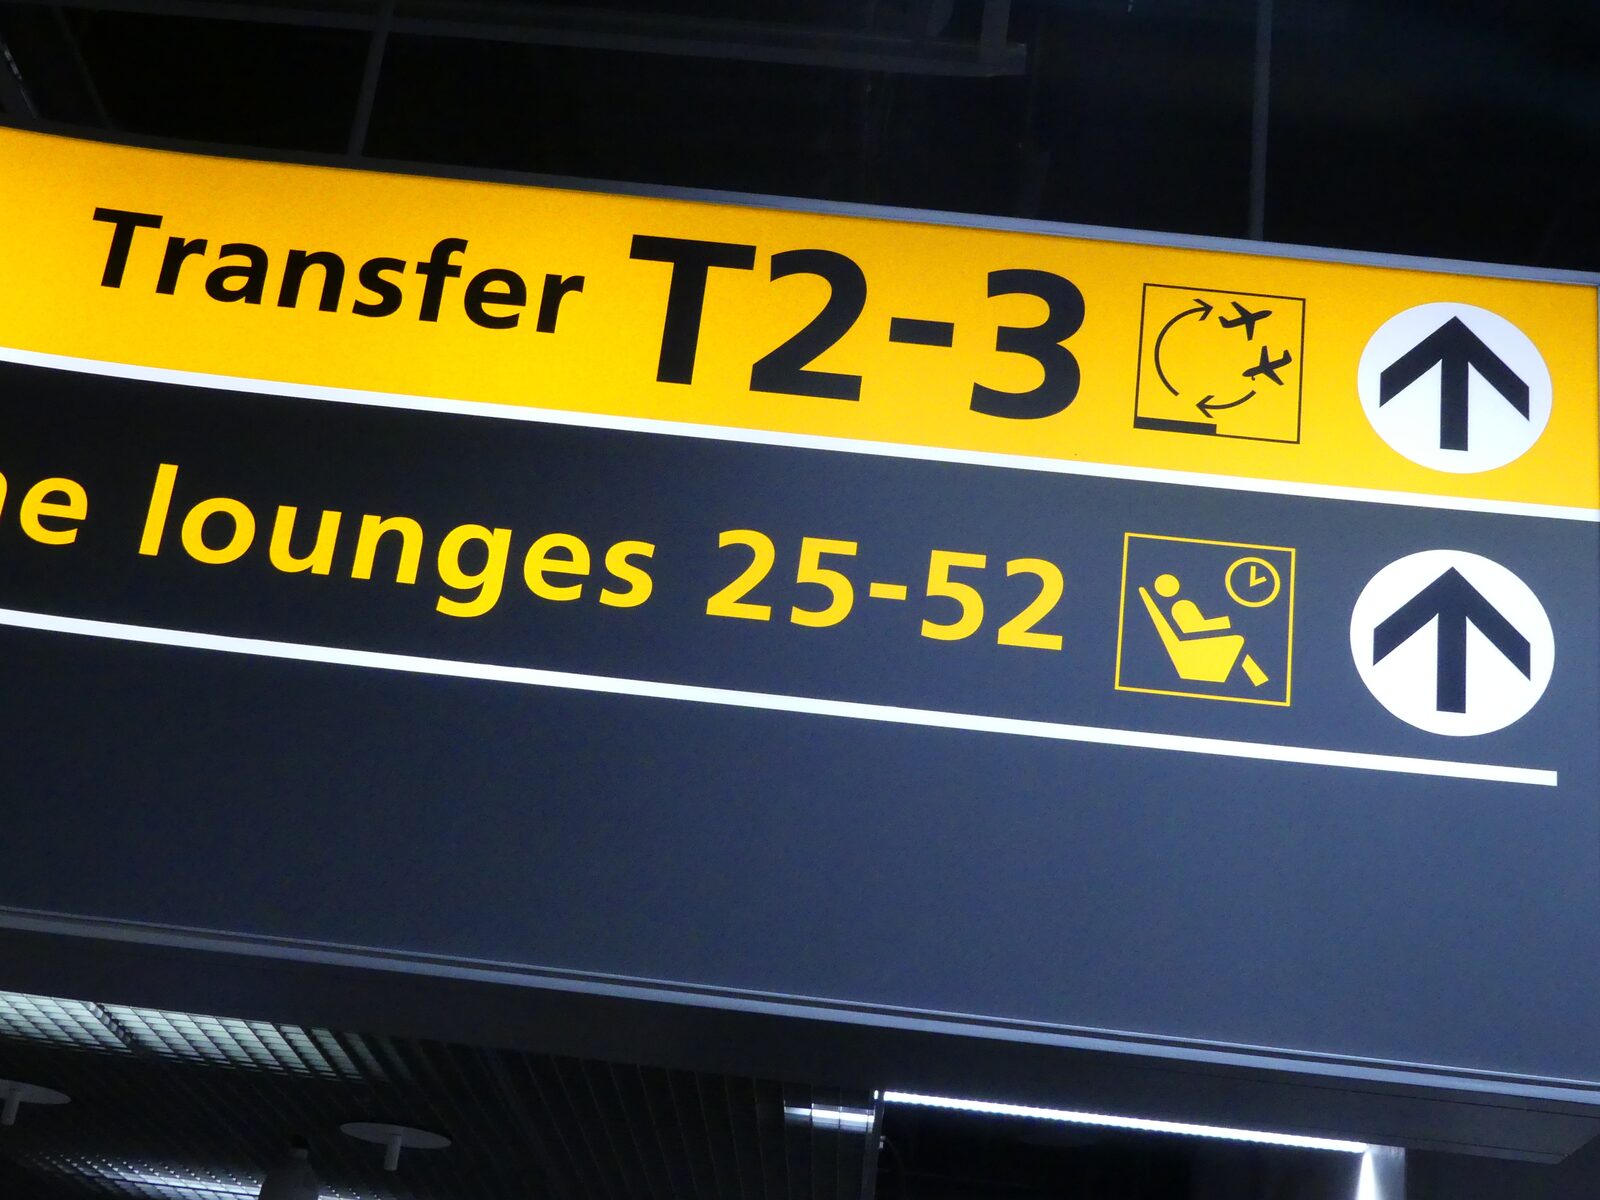 Sign at airport showing transfer and lounges